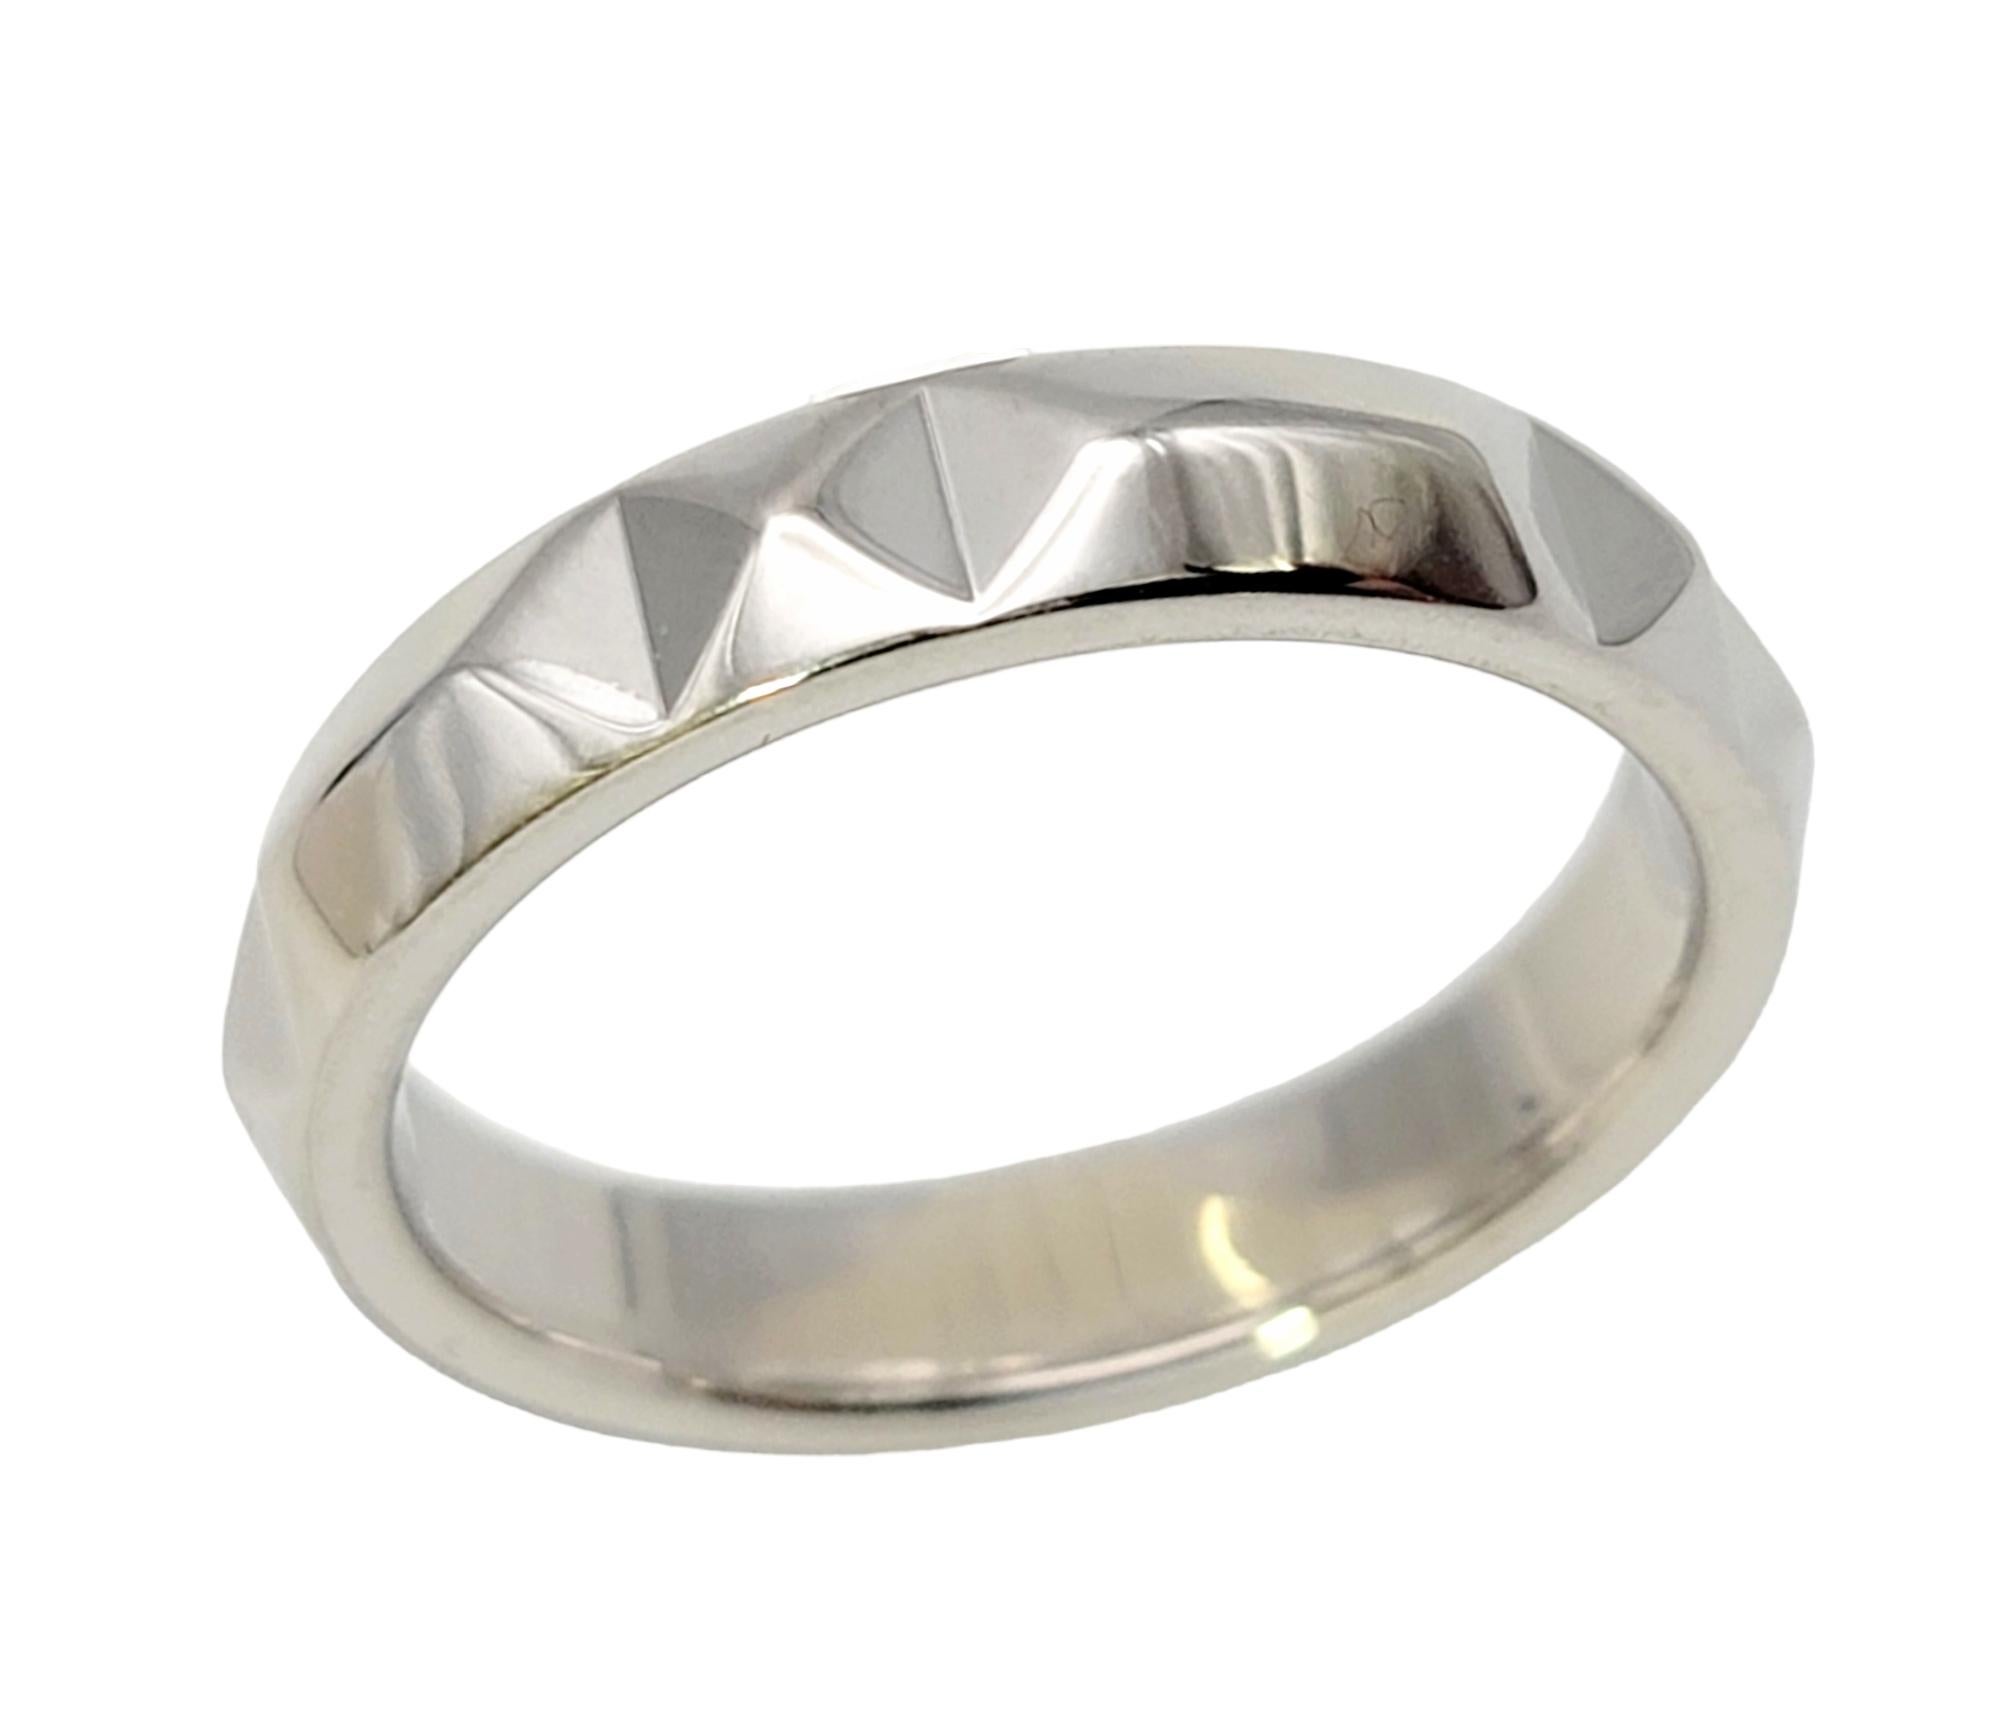 Ring size: 6.75

This sleek and modern band ring by Tiffany & Co. looks effortlessly chic on the finger. Founded in 1837 in New York City, Tiffany & Co. is one of the world's most storied luxury design houses recognized globally for its innovative